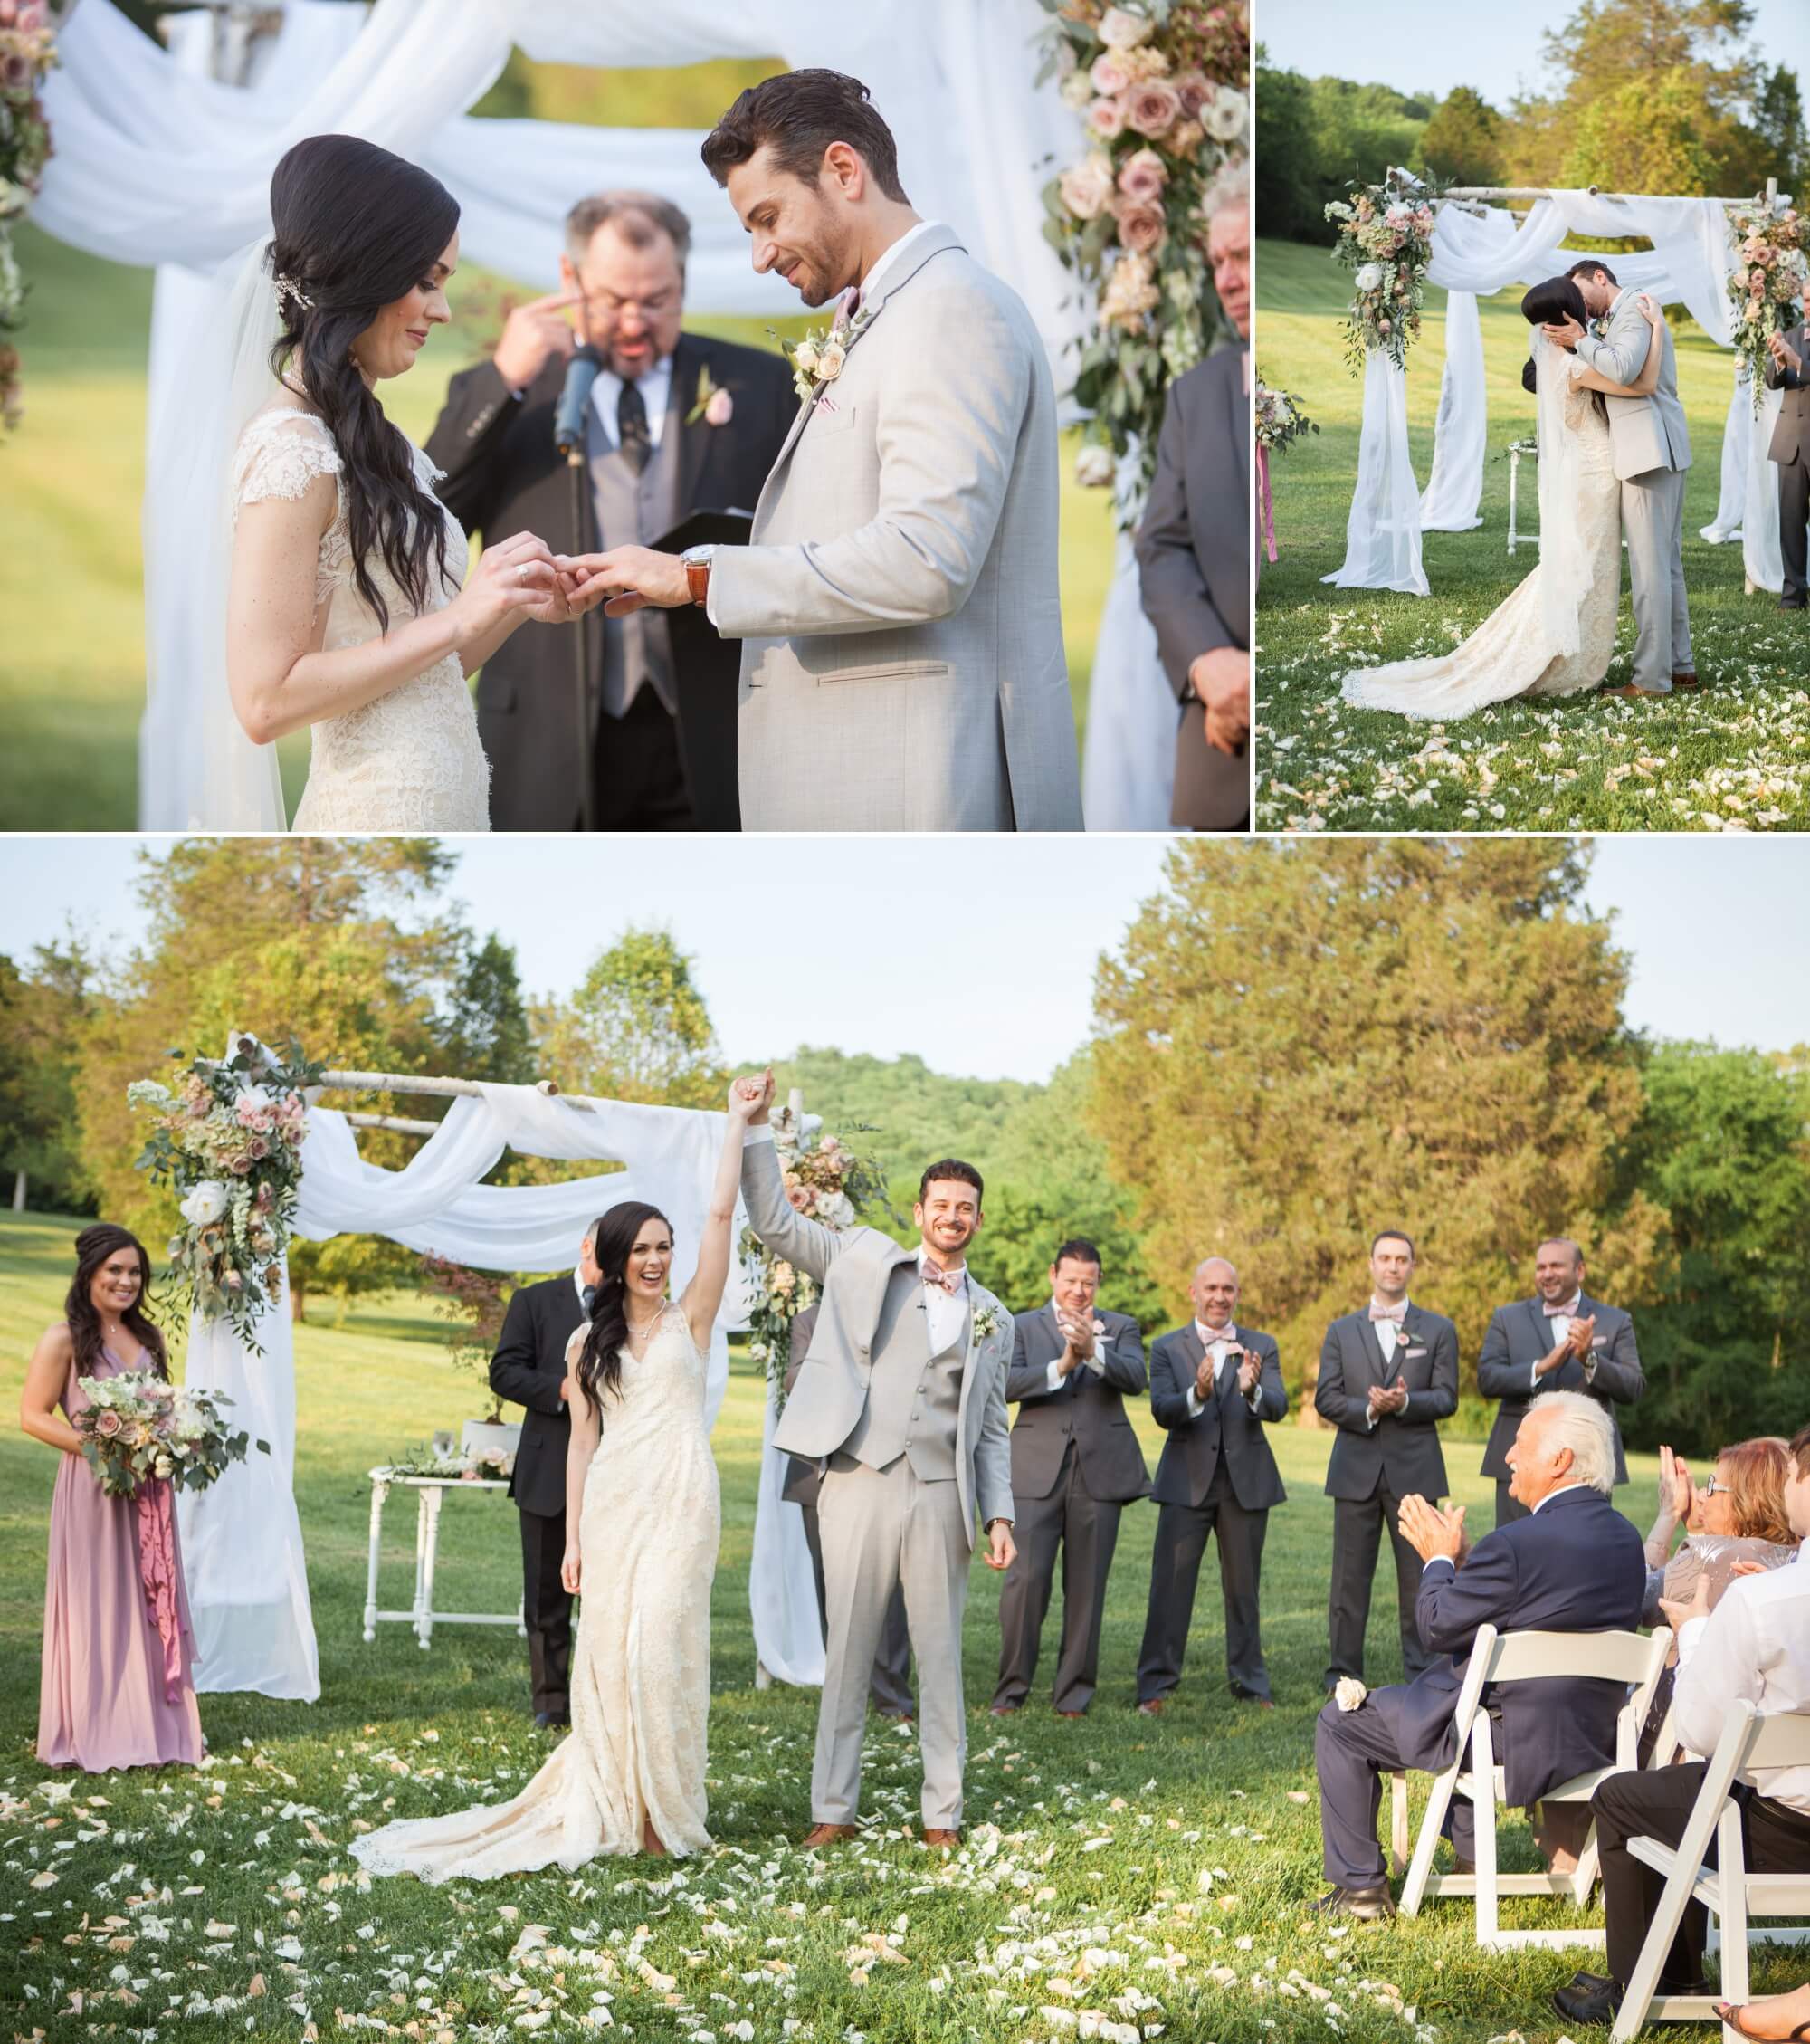 Exchanging rings and vows, during wedding ceremony at David and Jennifer's Cedarwood spring wedding in Nashville TN, photography by Krista Lee. 